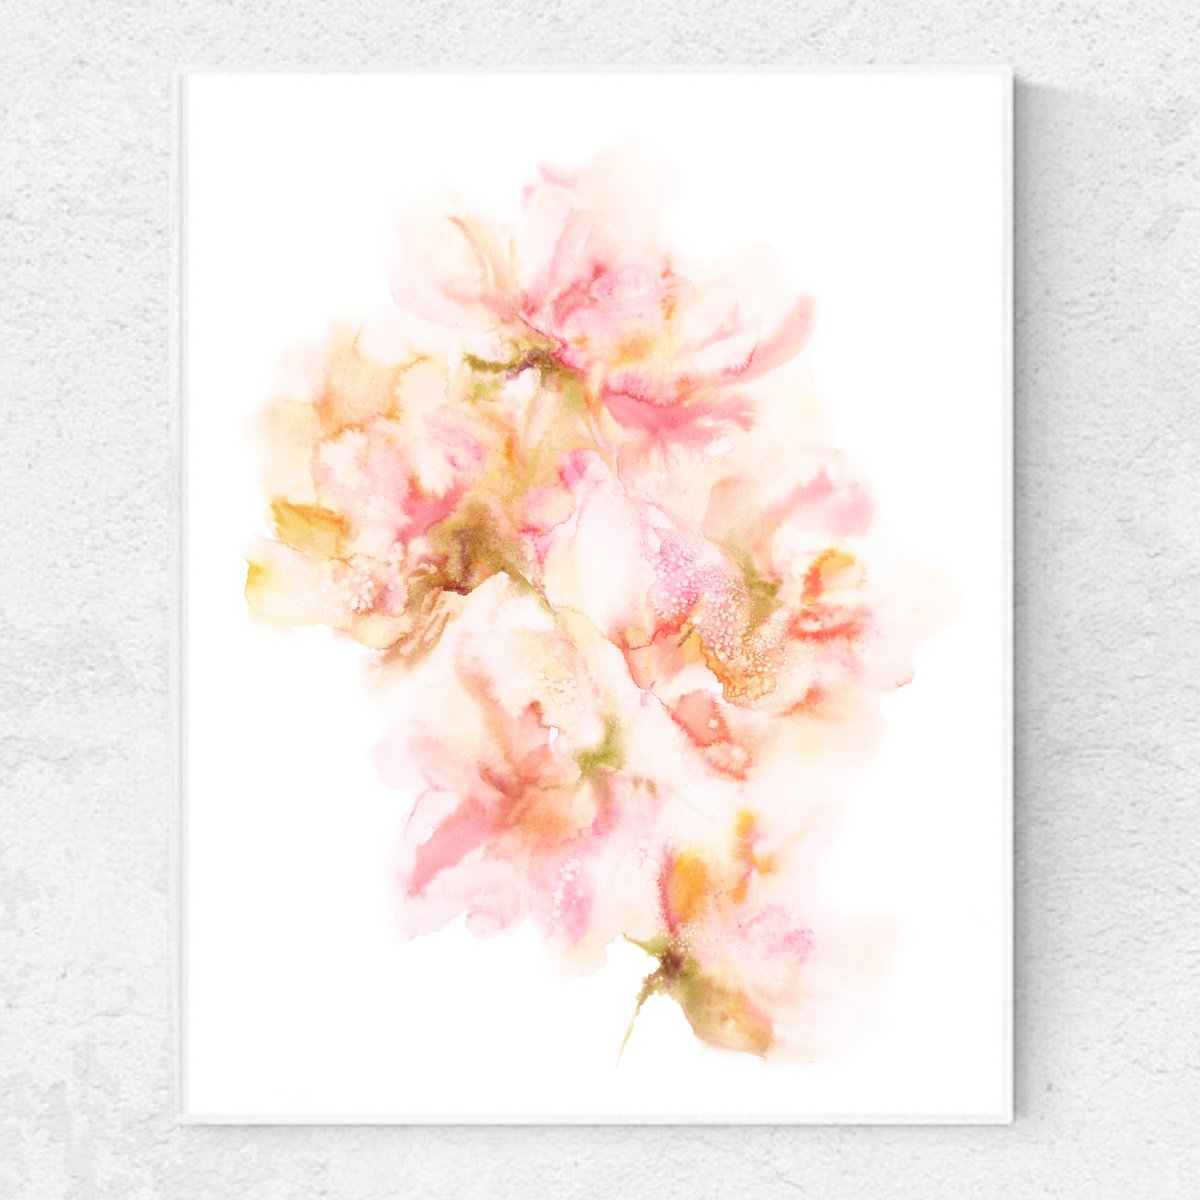 Abstract watercolor floral painting, loose flowers Spring blossom by Olya Grigo